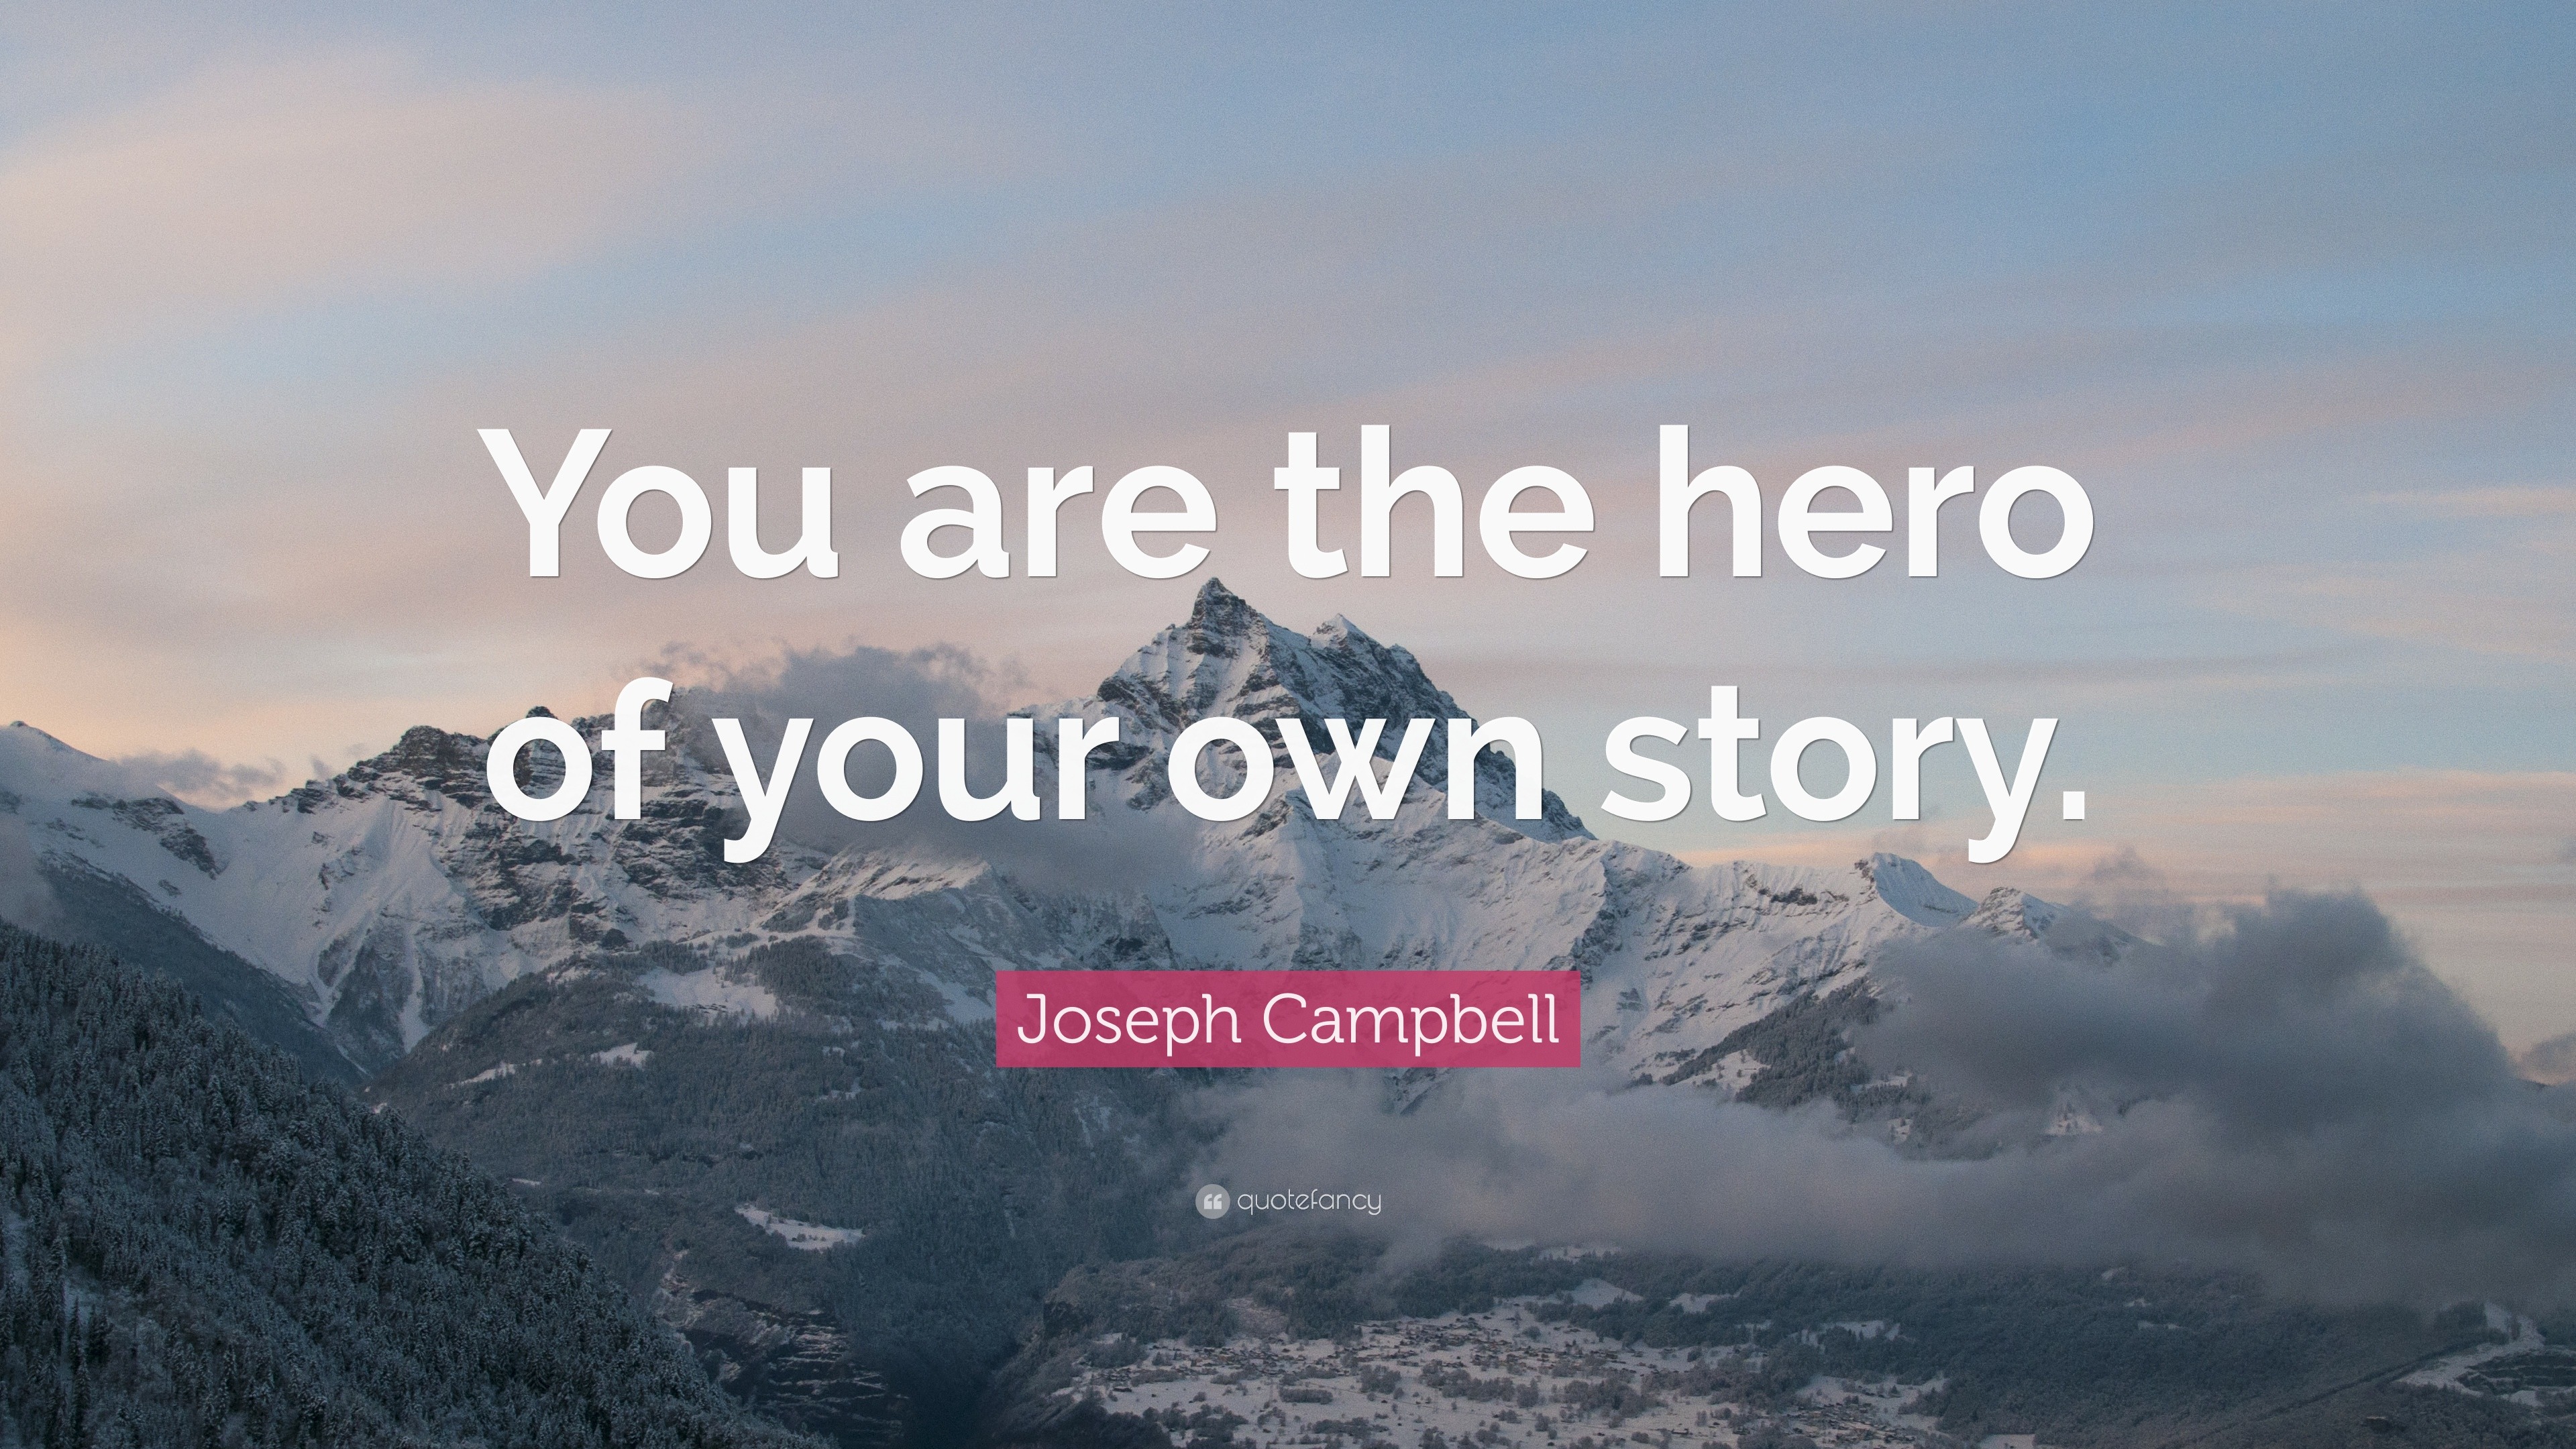 25164 Joseph Campbell Quote You are the hero of your own story